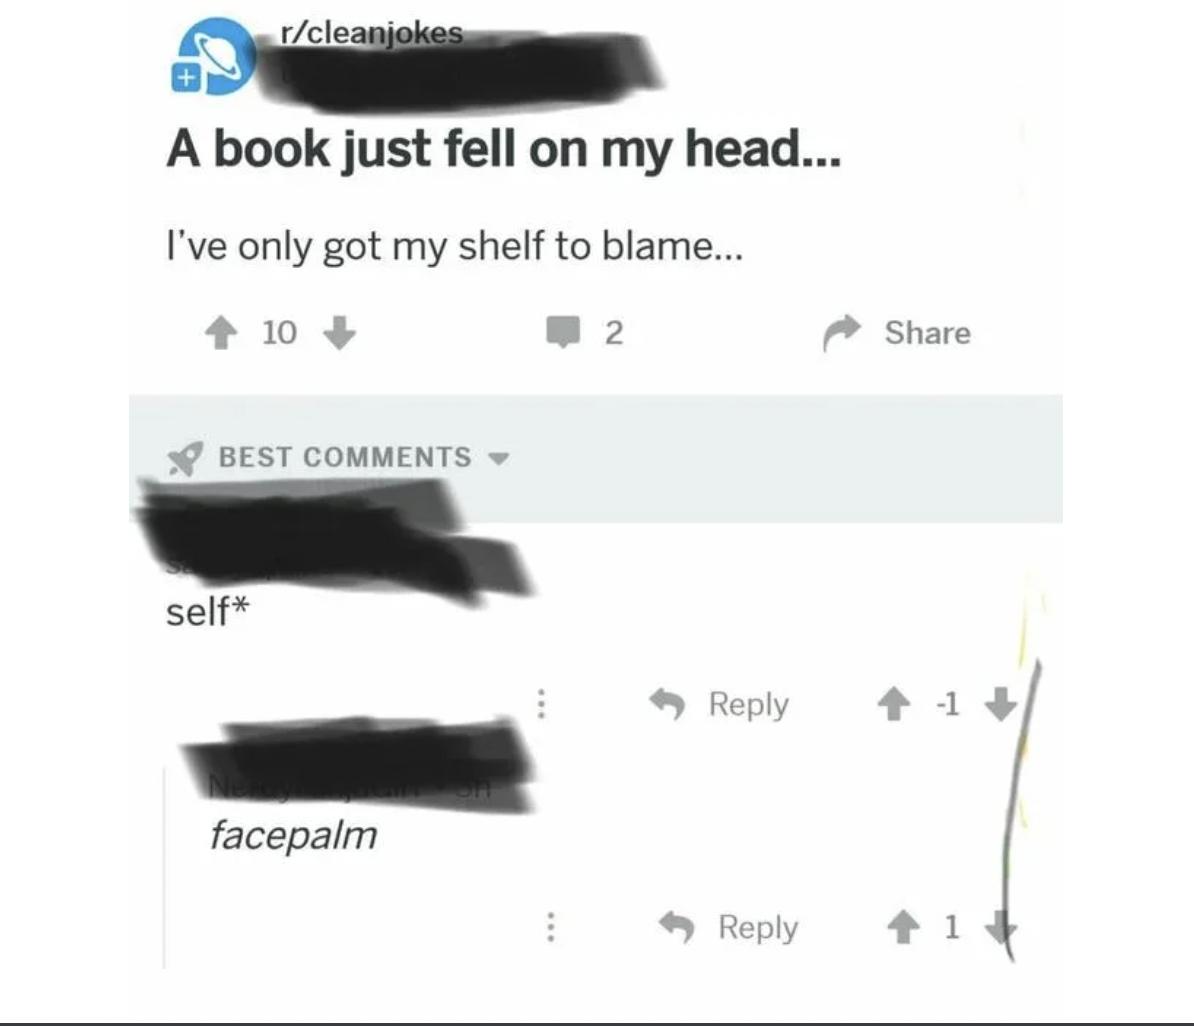 People who didn't get the joke - A book just fell on my head... I've only got my shelf to blame... 10 2 Best self facepalm 1.